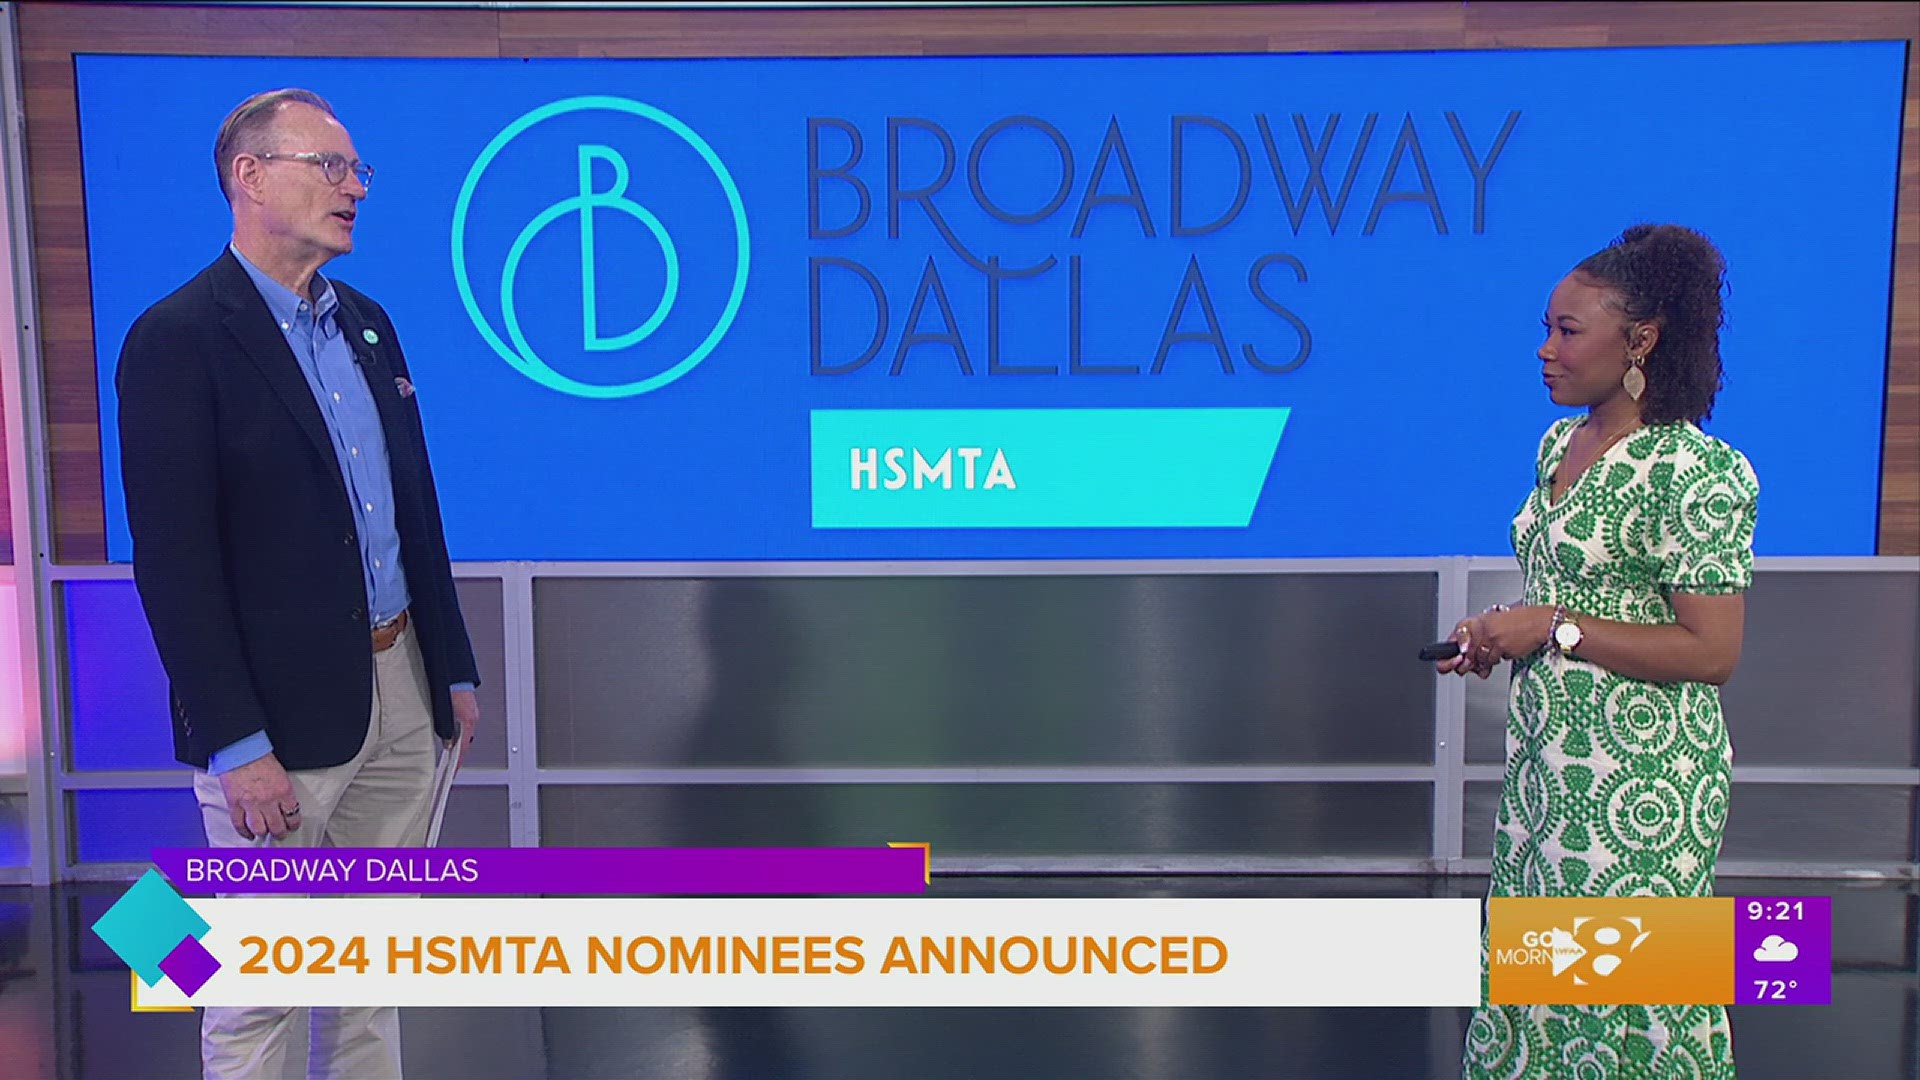 Broadway Dallas 2024 High School Musical Theatre Awards are out! We got a look at the nominees for Outstanding Music and Outstanding lead performer.